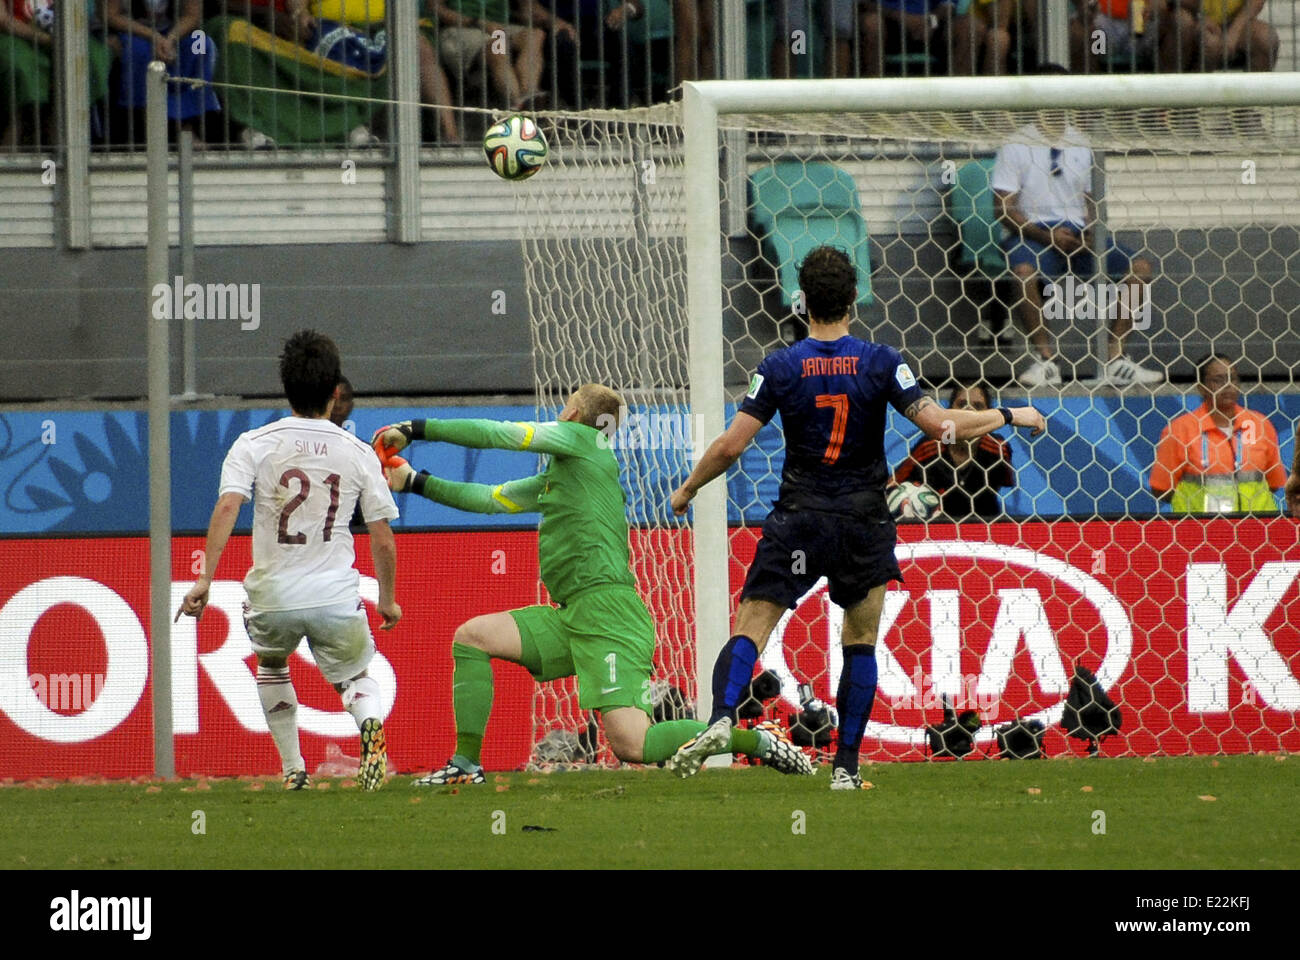 Salvador, Brazil. 13th June, 2014. Spain's David Silva, #21, tries without sucess to score against Netherlands' goalkeeper, Jasper Cillessen, #1, while chased by #7 Daryl Janmat, at the 2014 World Cup match between Spain and Netherlands, in Salvador, Brasil, this friday 13th Credit:  Gustavo Basso/NurPhoto/ZUMAPRESS.com/Alamy Live News Stock Photo